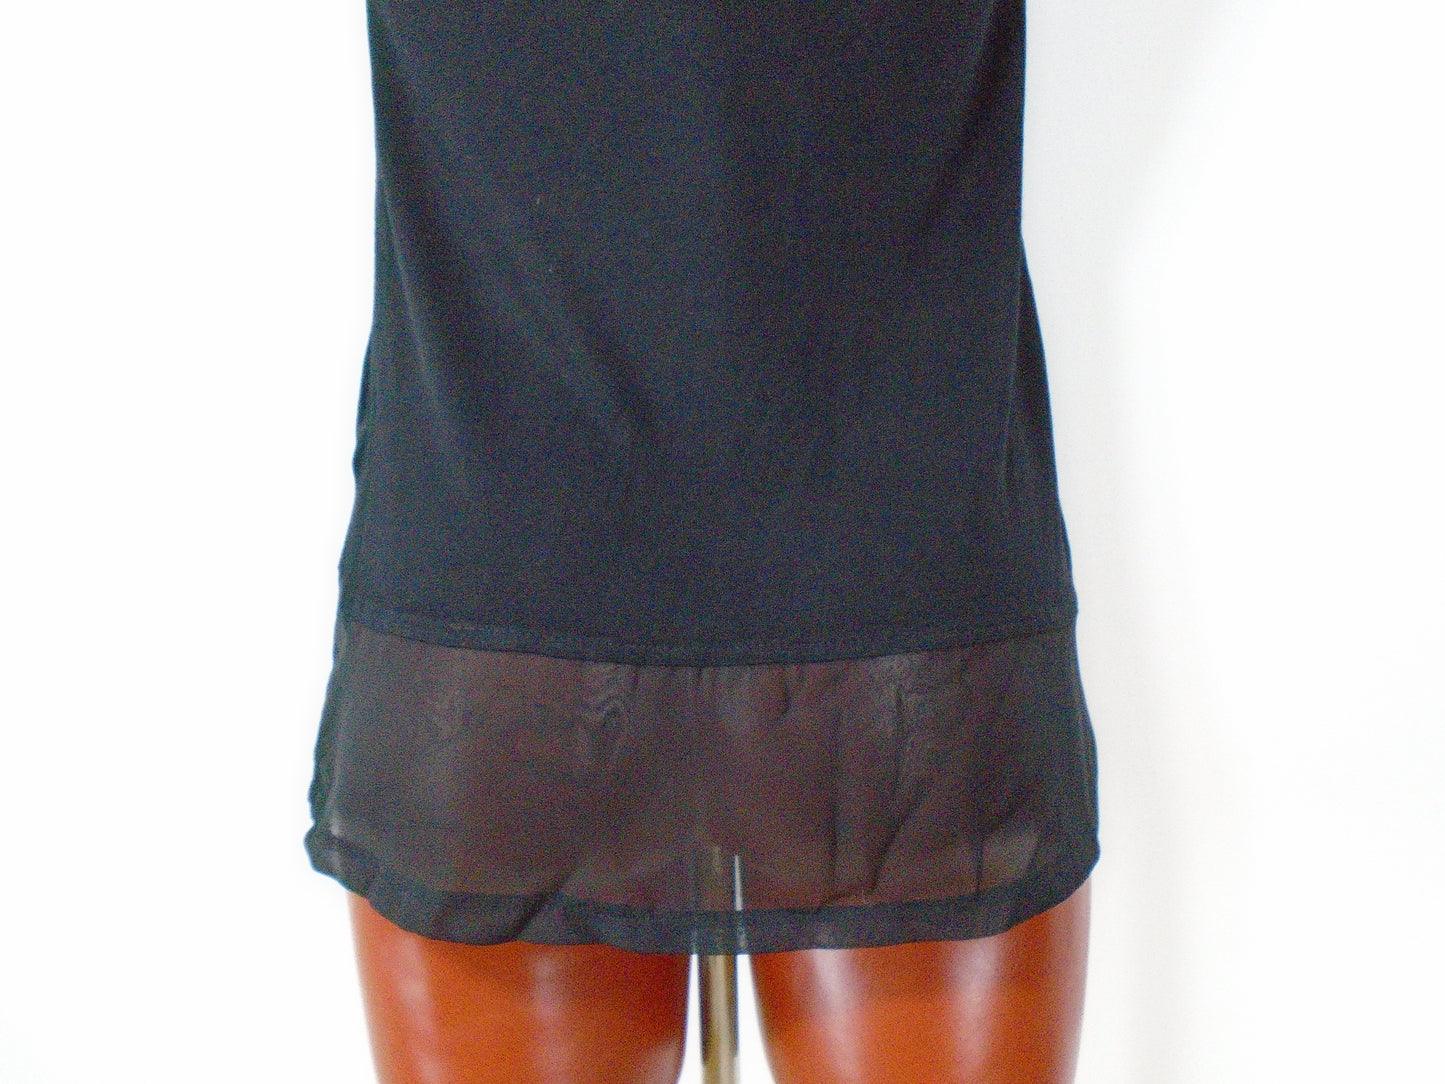 Women's Undershirt H&M. Color: Black. Size: XS. Condition: New without tags. | 220201015